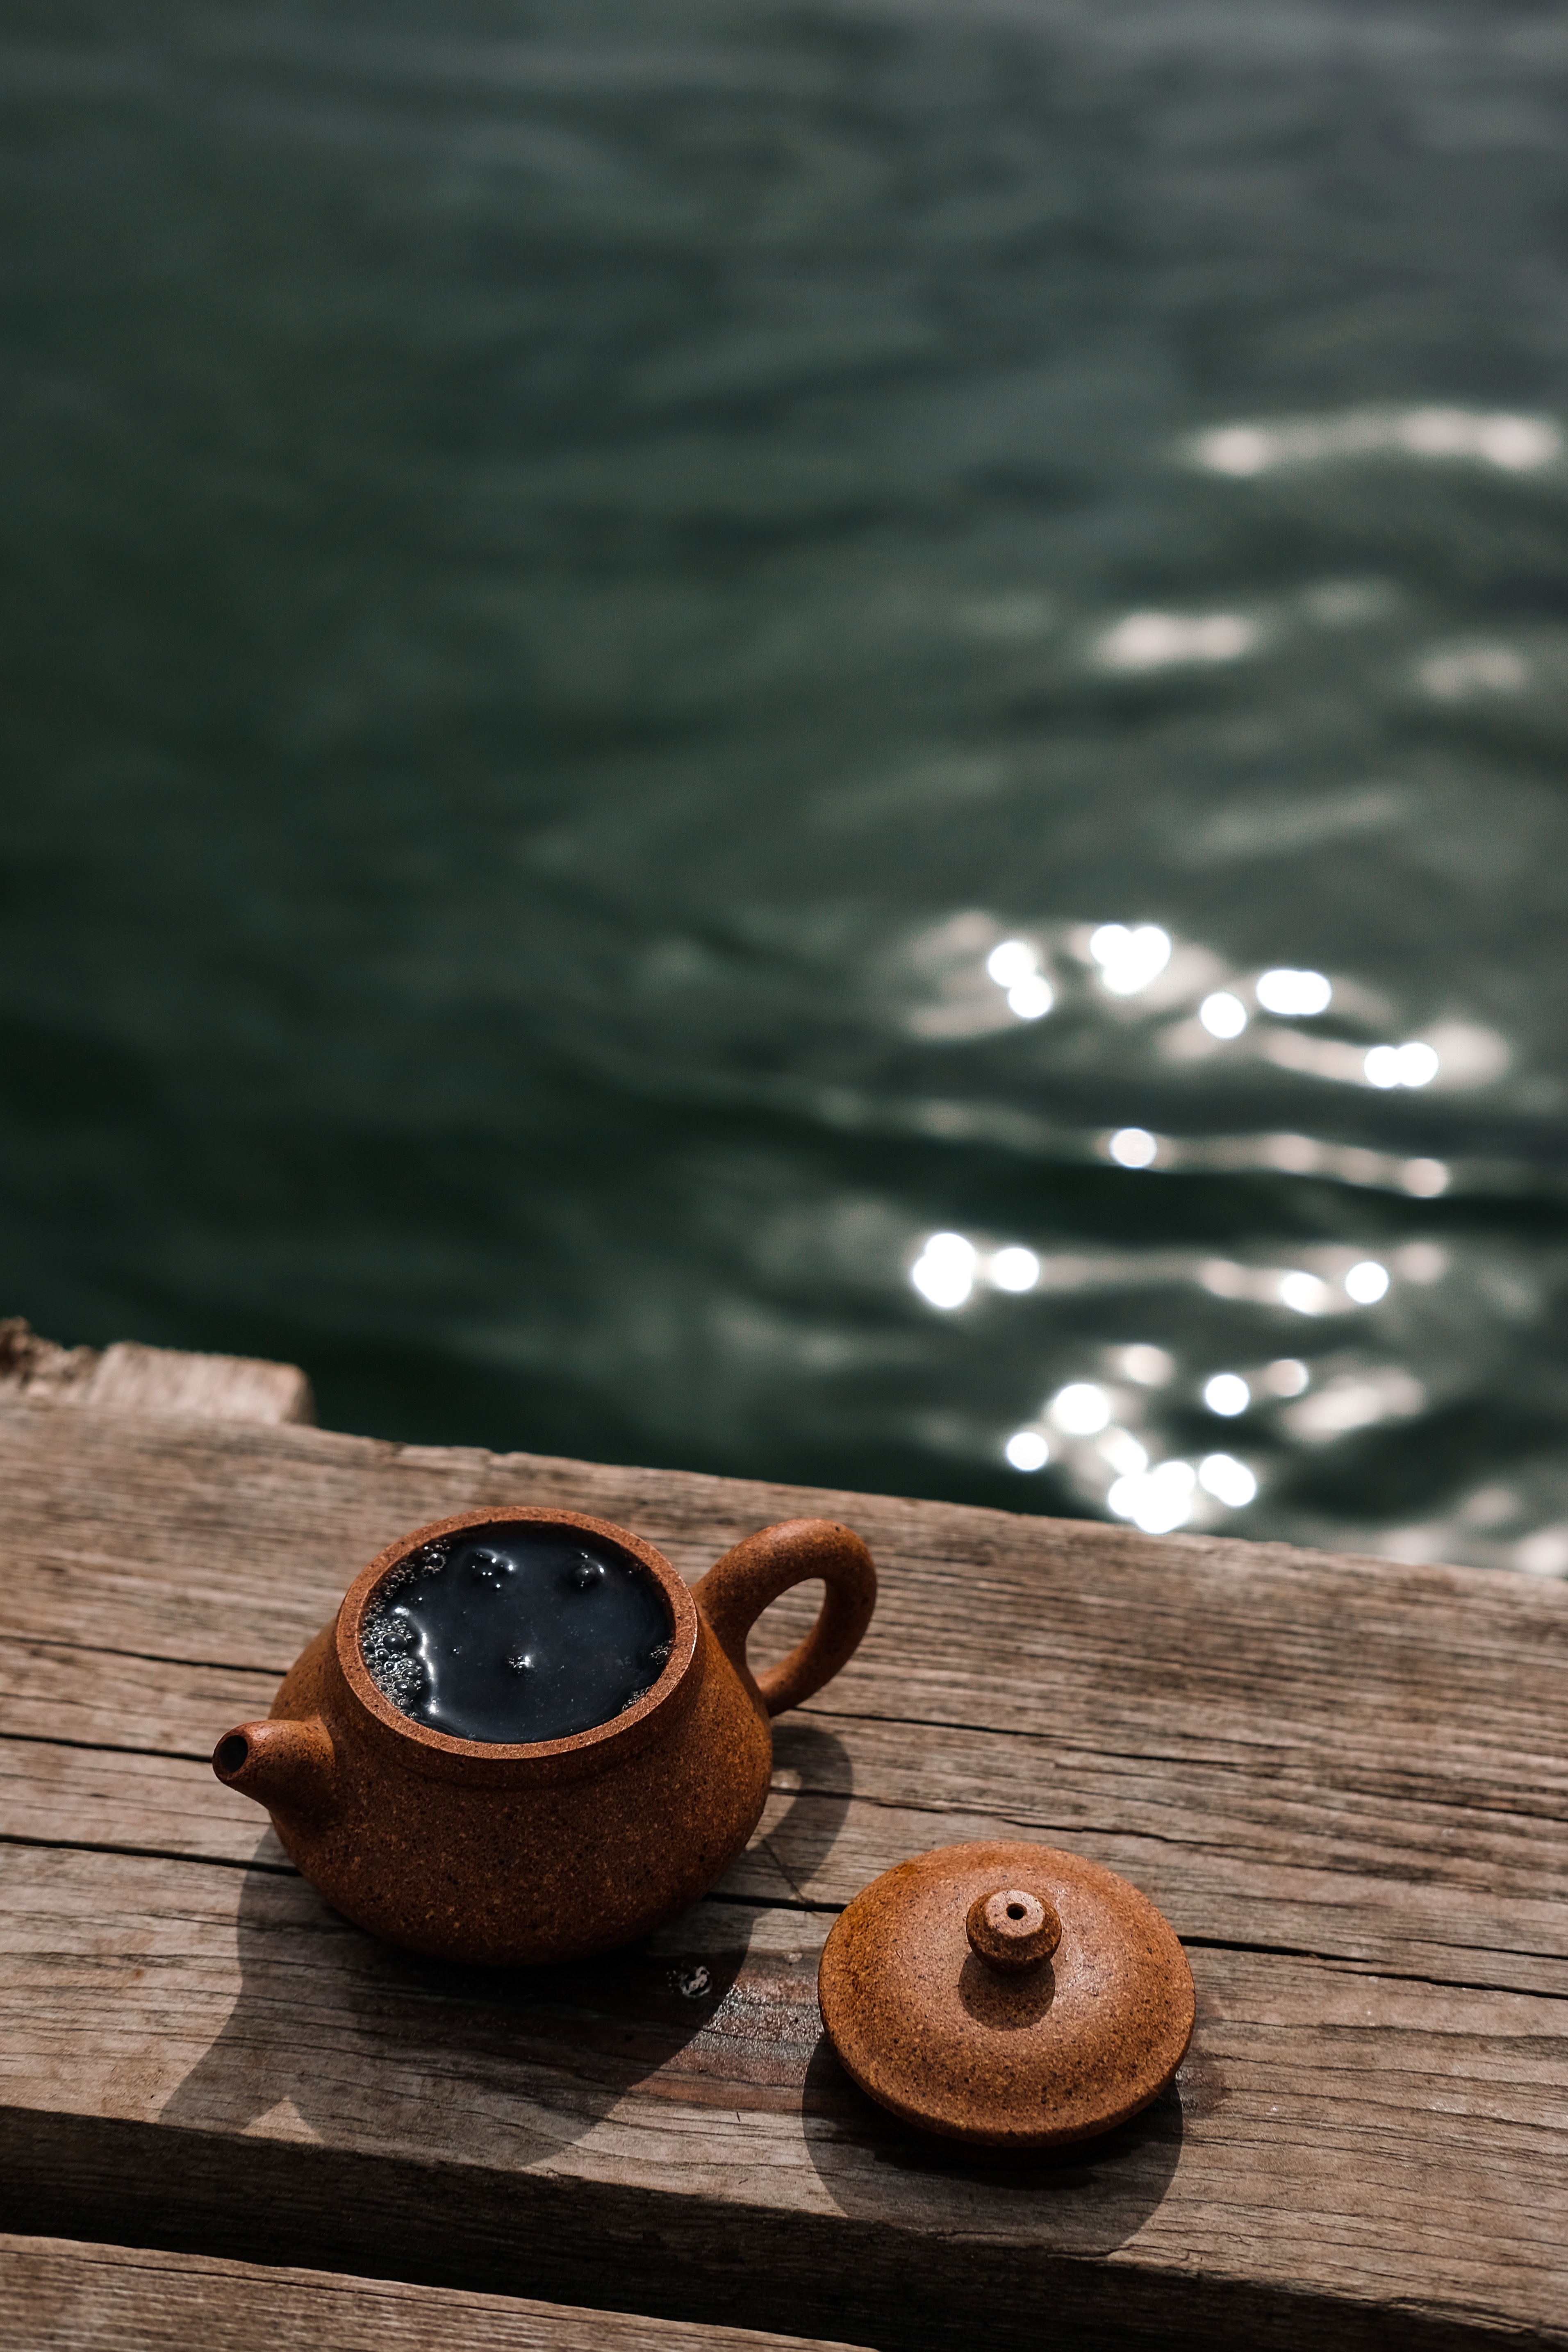 133942 Screensavers and Wallpapers Teapot for phone. Download tablewares, miscellanea, miscellaneous, drink, beverage, clay, tea, teapot, kettle pictures for free